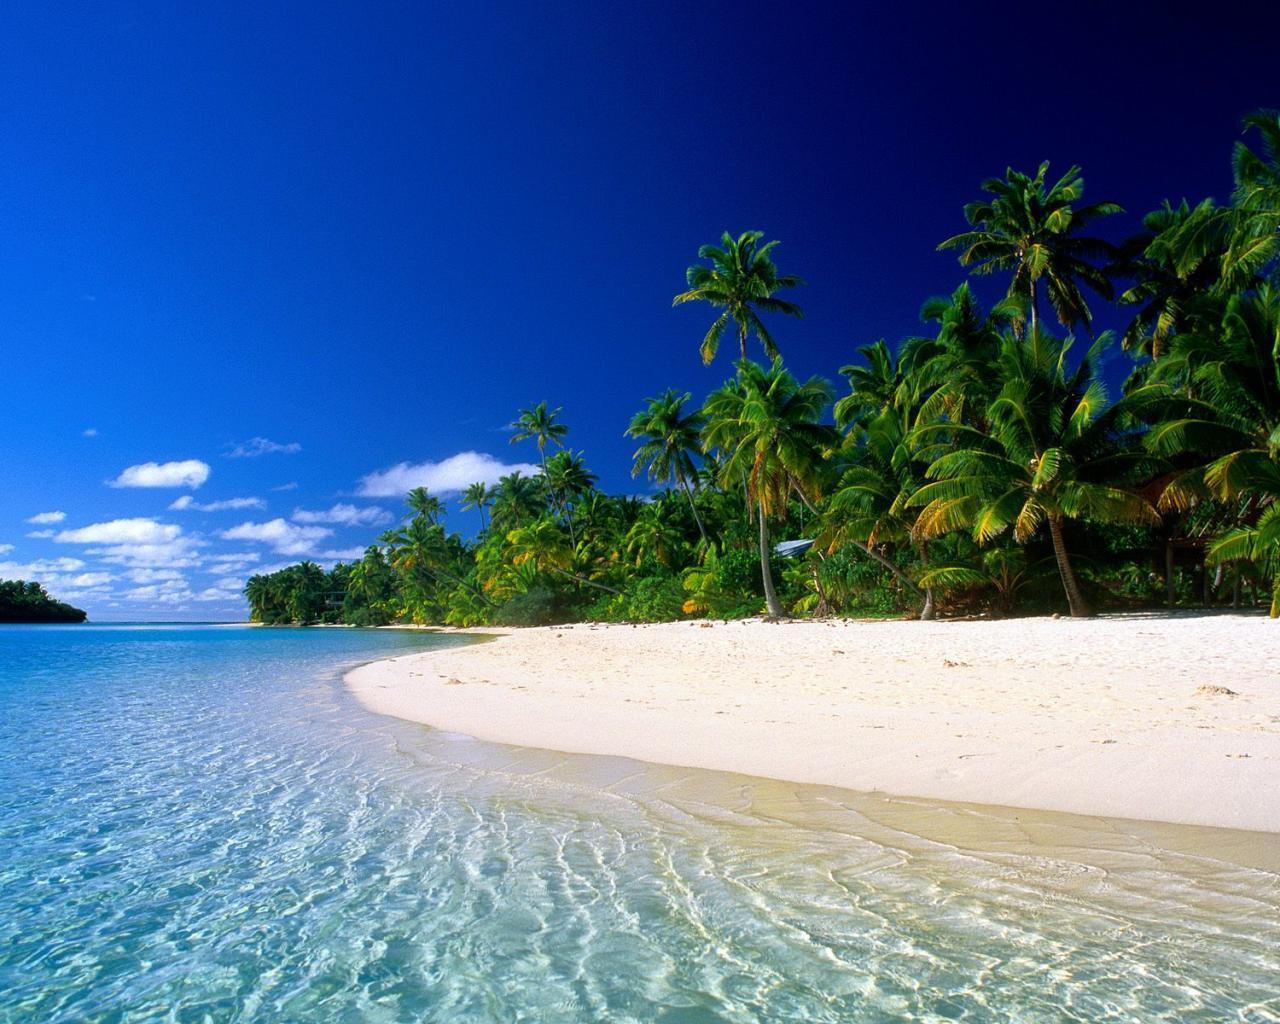 Very Beautiful Beach For Your PC Deskx1024 Notebook LCD